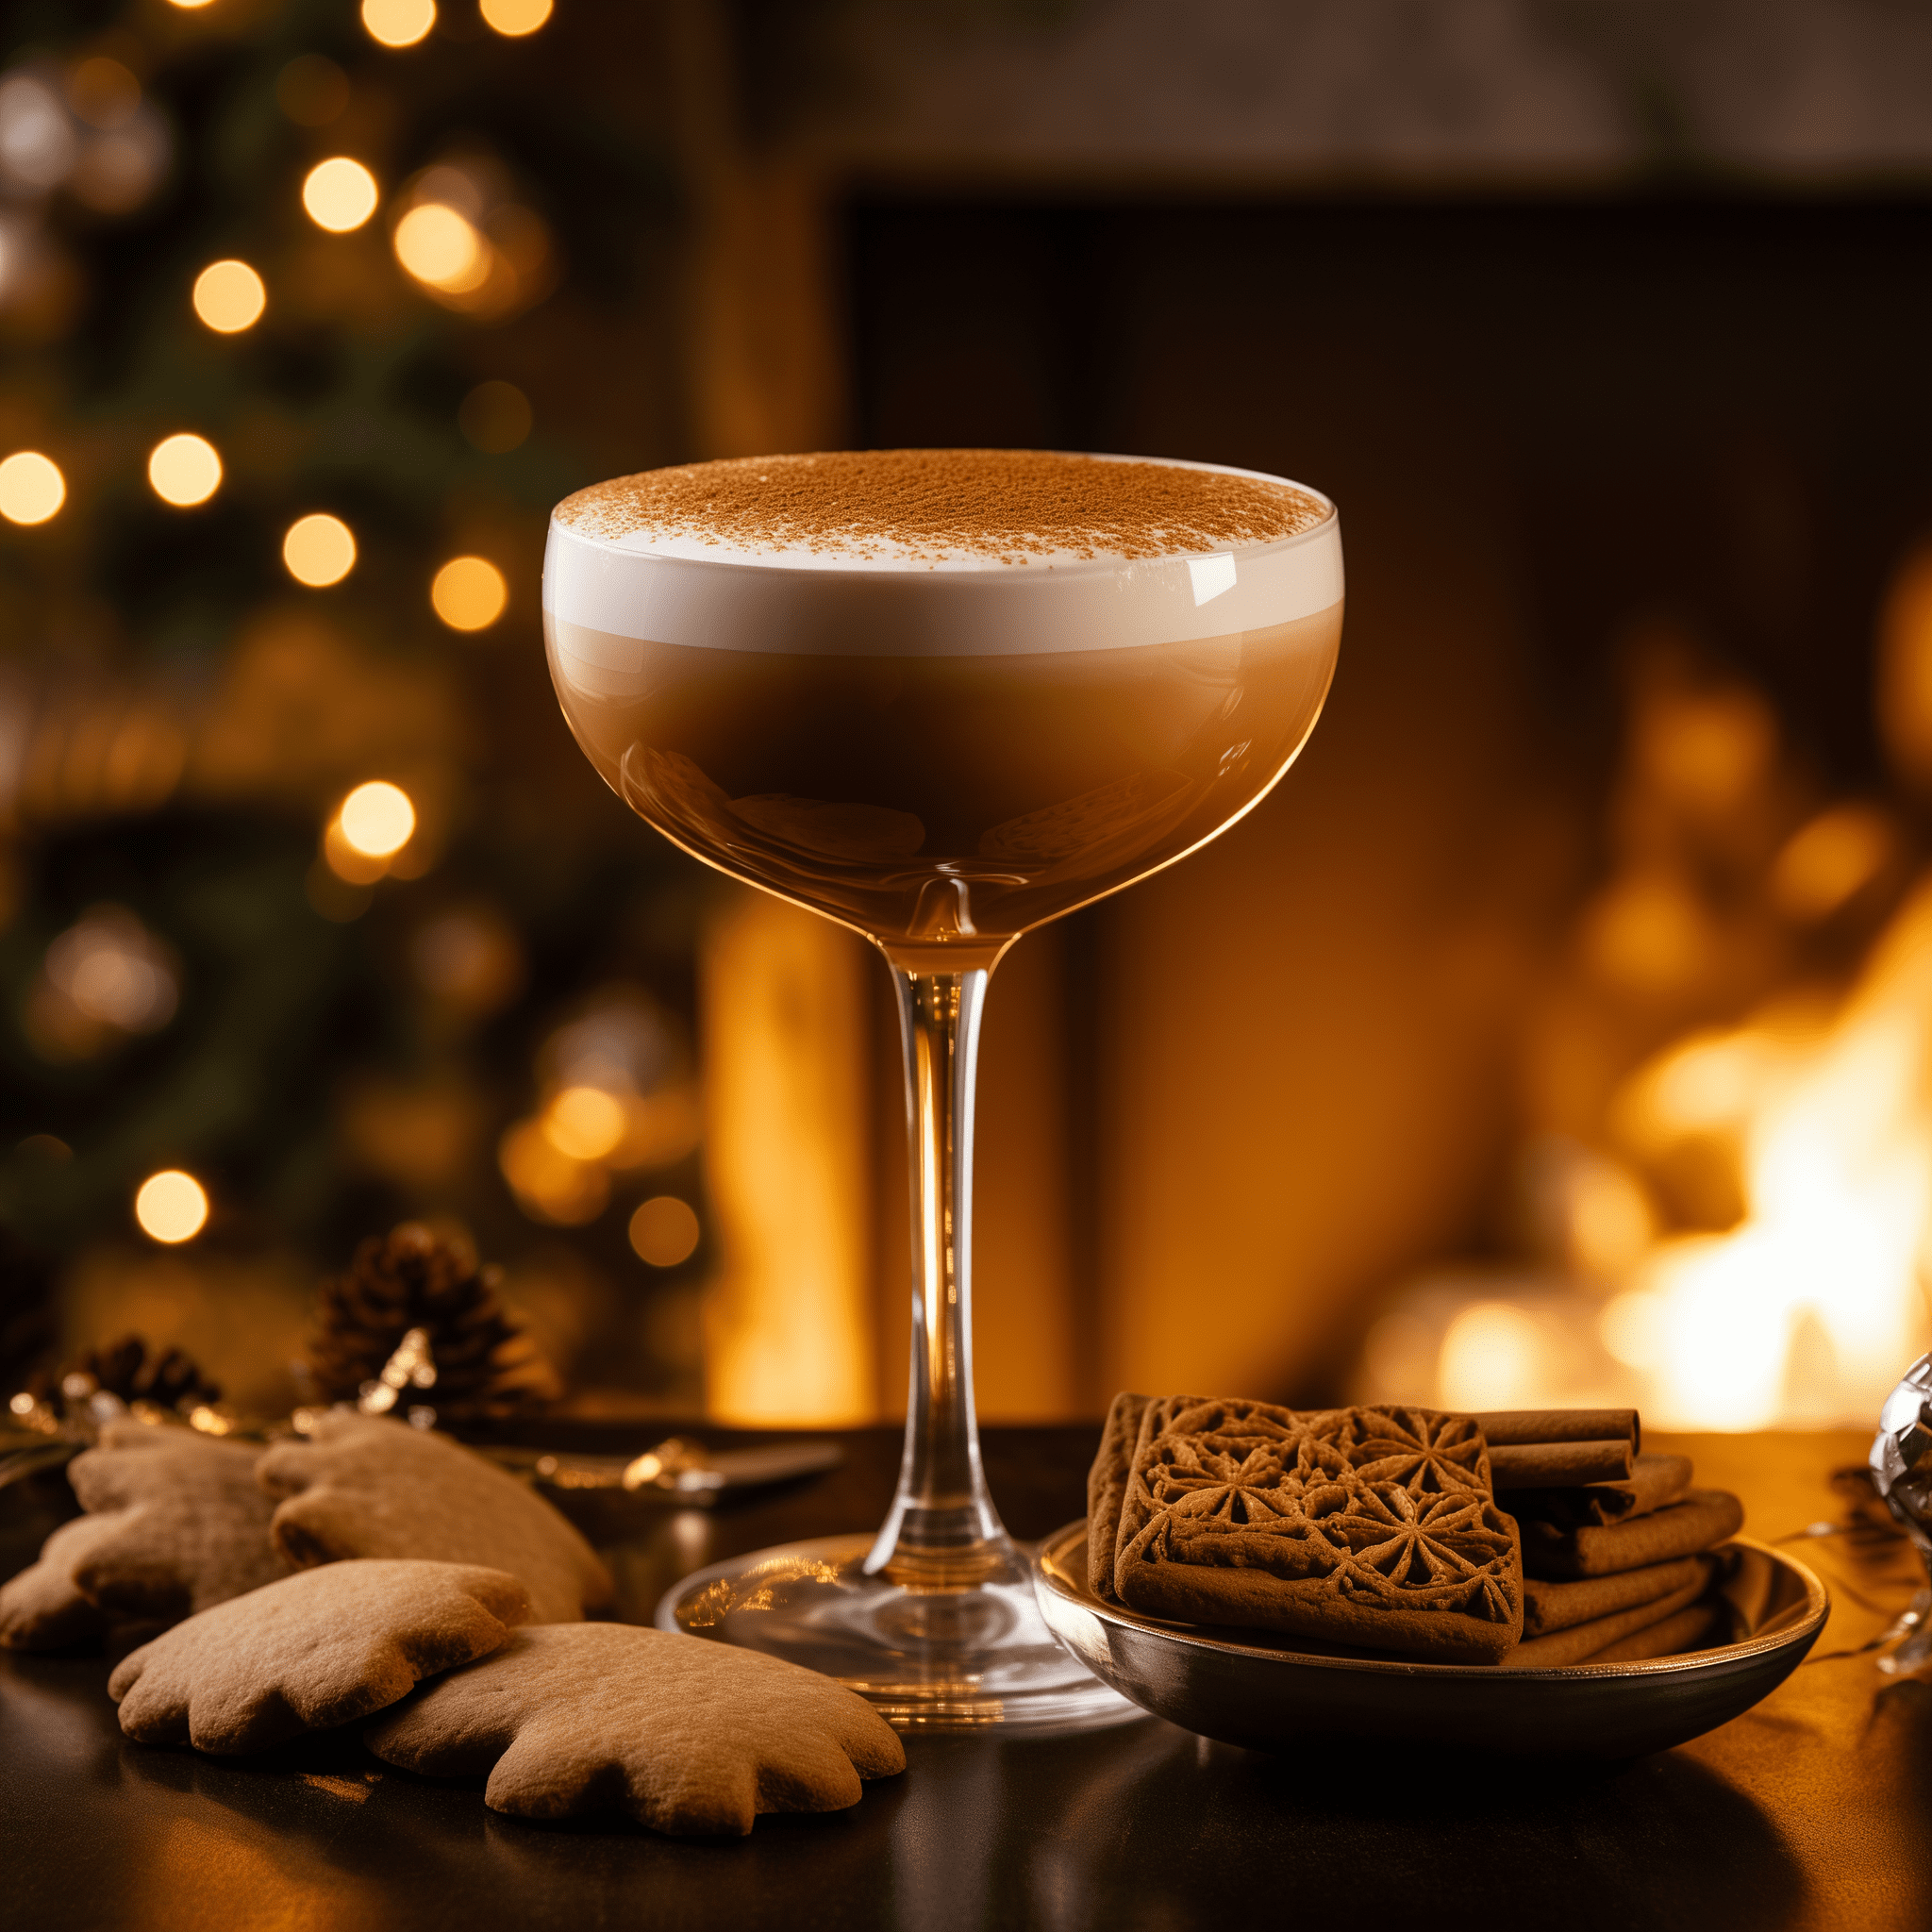 Gingerbread Manhattan Cocktail Recipe - The Gingerbread Manhattan offers a harmonious blend of sweet and spicy, with the gingerbread syrup providing a comforting warmth. The whiskey's inherent richness is complemented by the herbal notes of the sweet vermouth, while the bitters bring a depth that balances the sweetness, resulting in a complex, full-bodied cocktail.